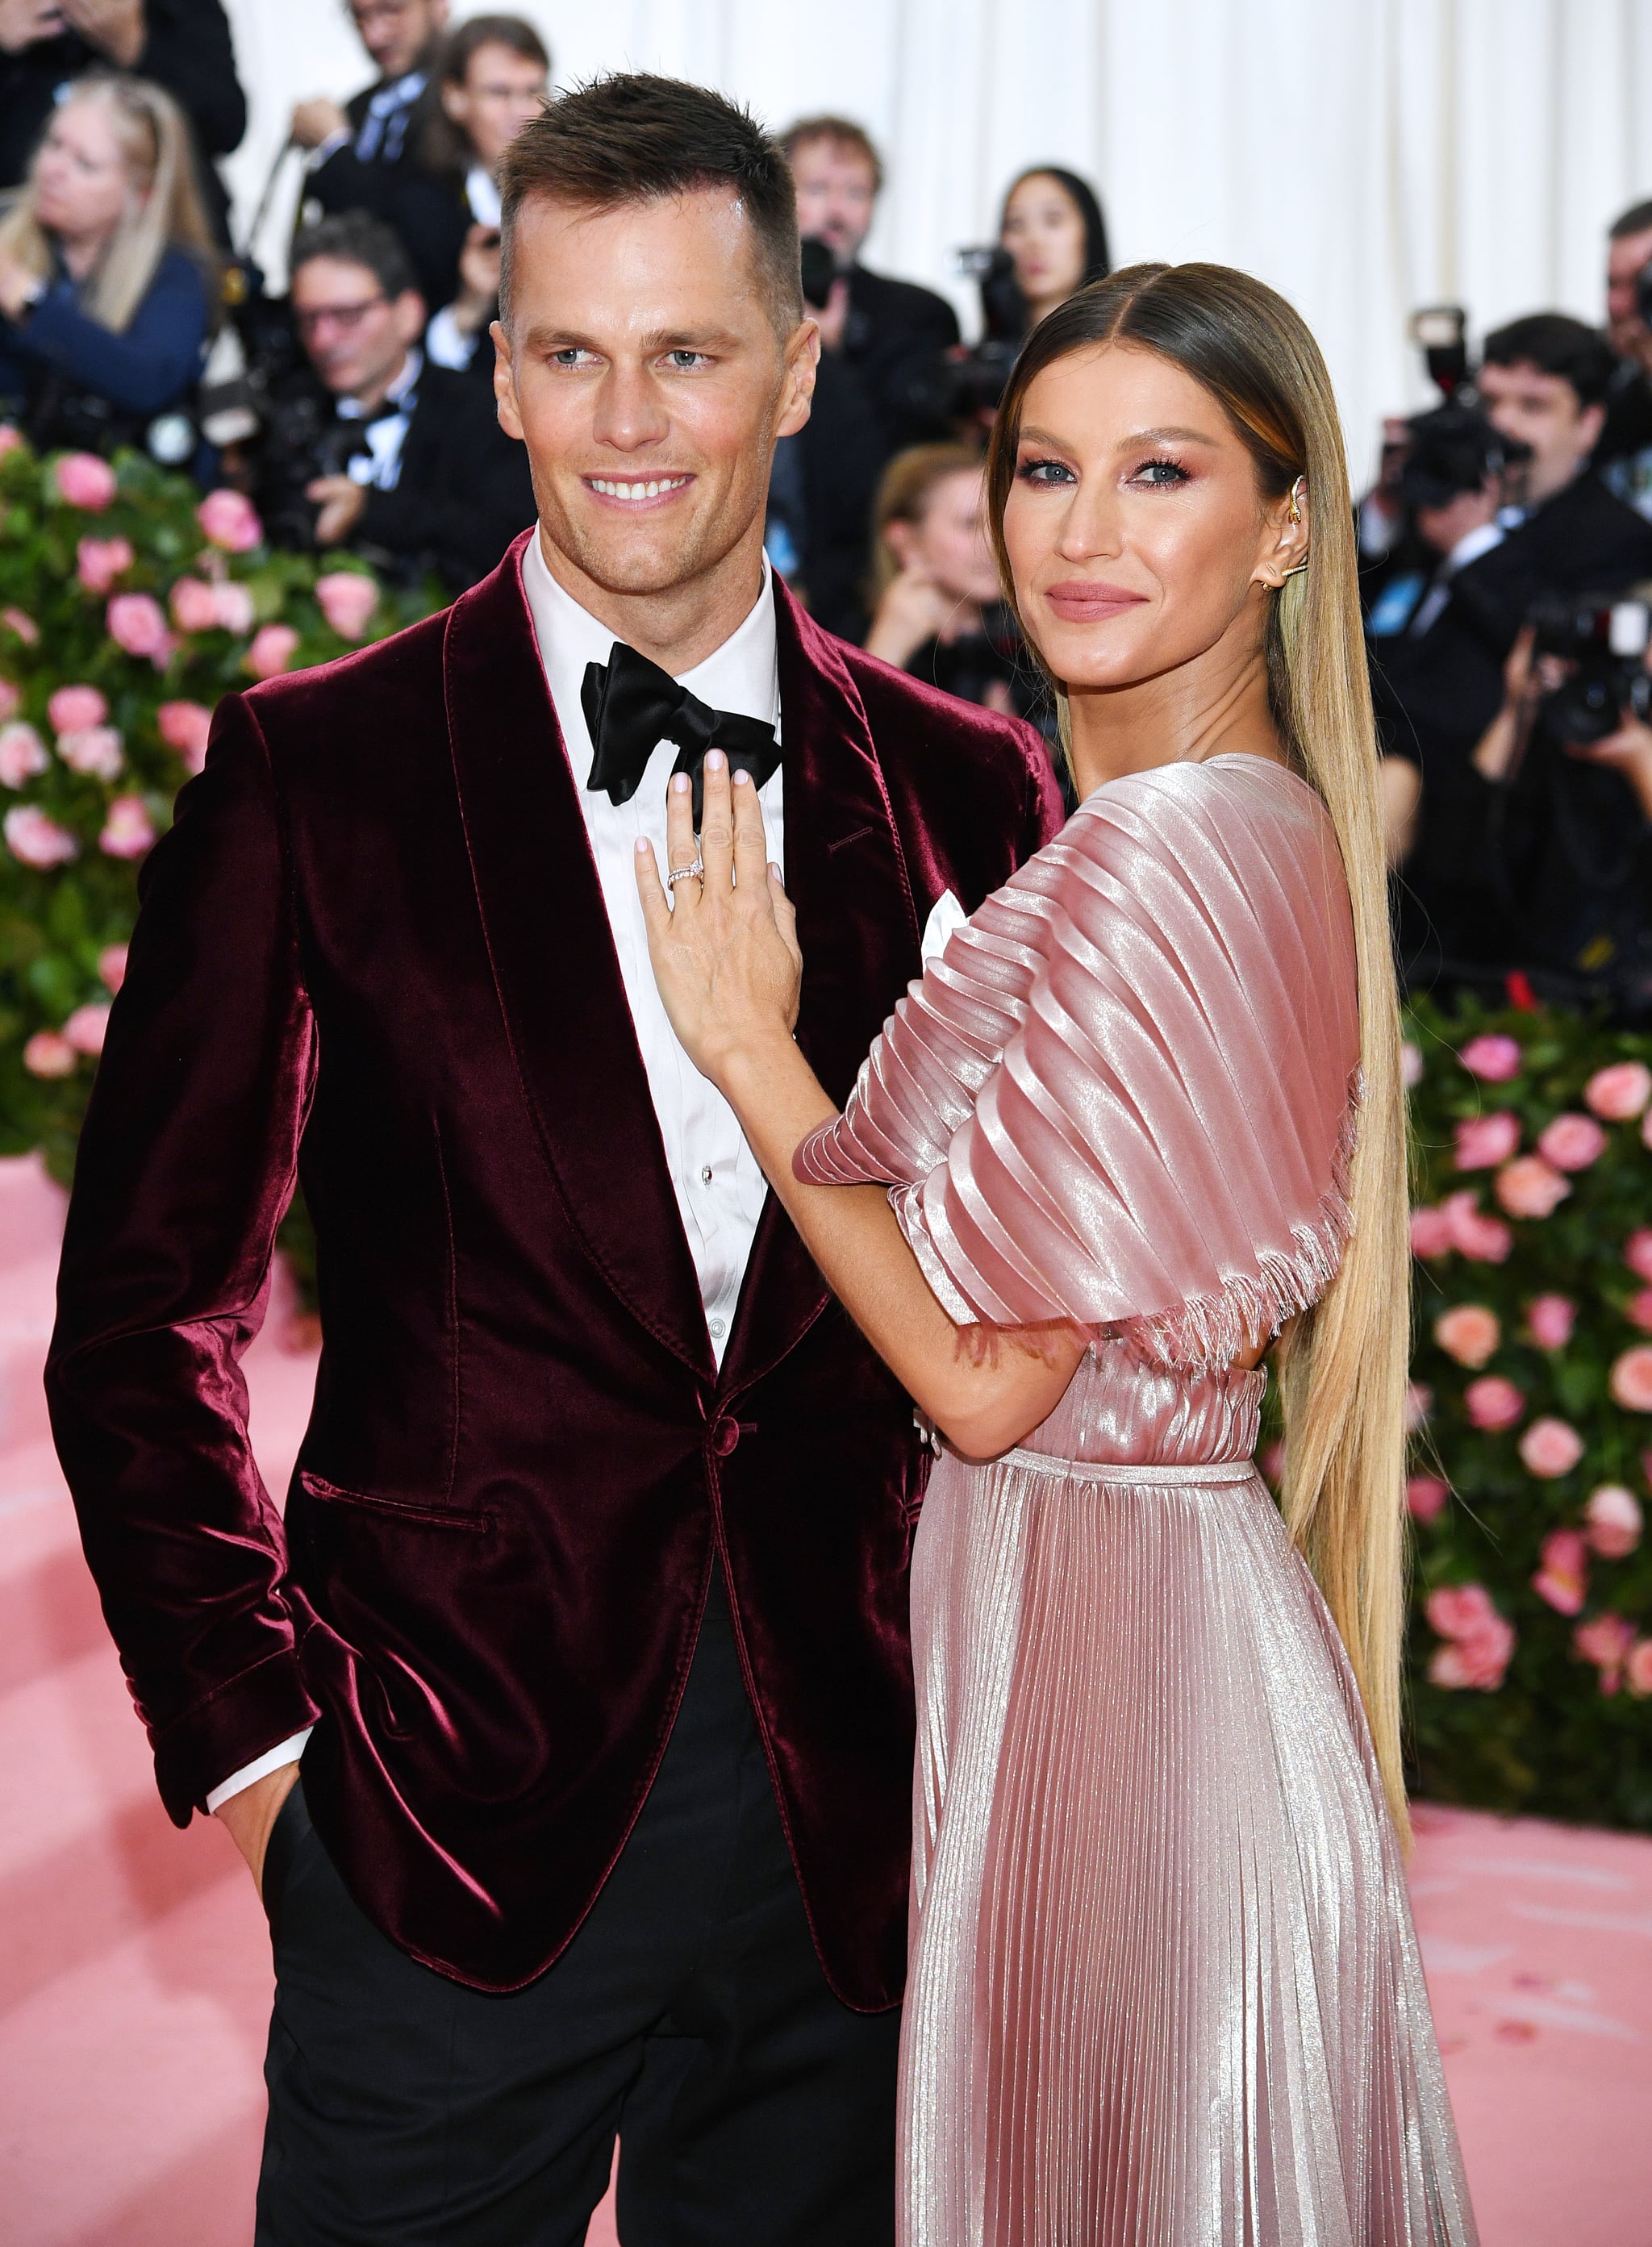 NEW YORK, NEW YORK - MAY 06: Gisele Bündchen and Tom Brady attend The 2019 Met Gala Celebrating Camp: Notes on Fashion at Metropolitan Museum of Art on May 06, 2019 in New York City. (Photo by Dimitrios Kambouris/Getty Images for The Met Museum/Vogue)